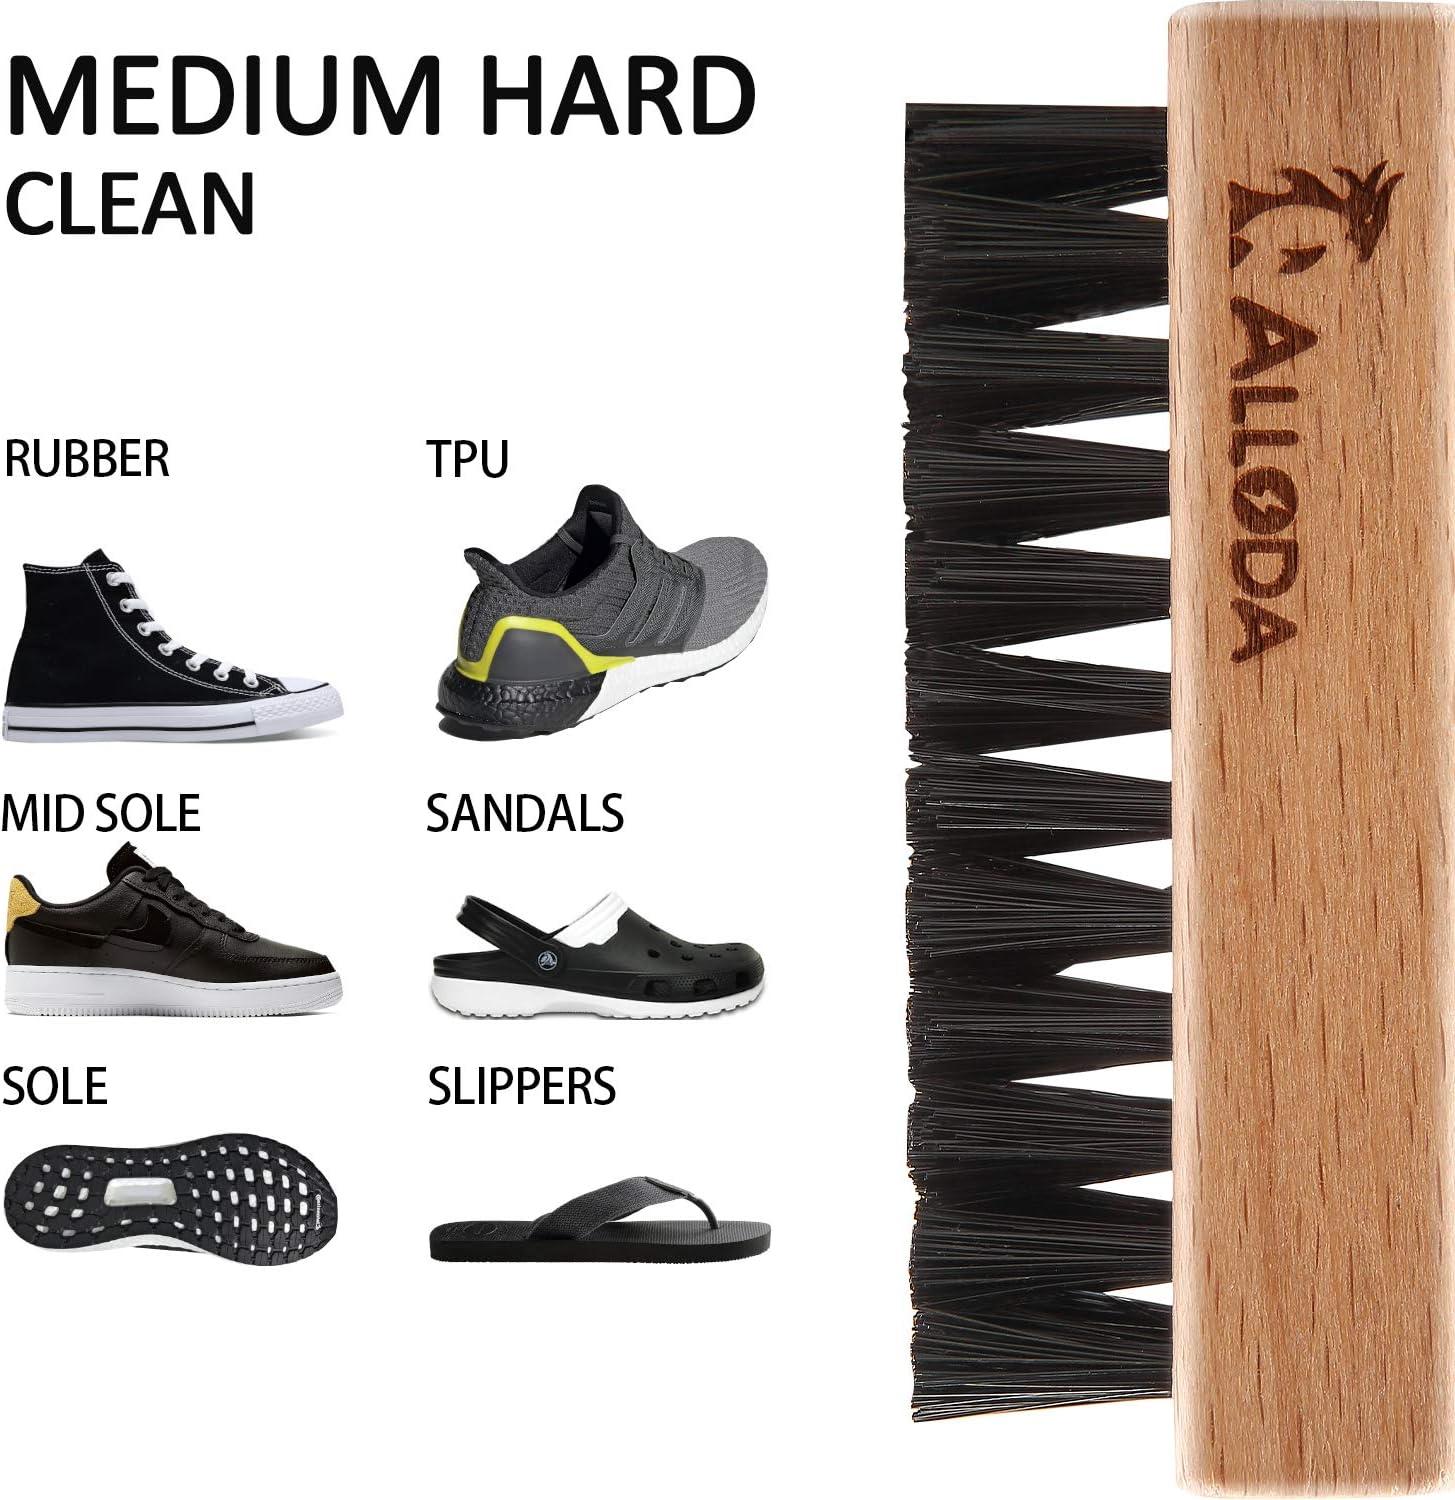 x All-Purpose Sneaker Cleaning Brush, 100% Boar Bristles - Soft Bristles for Delicate Shoe Materials!